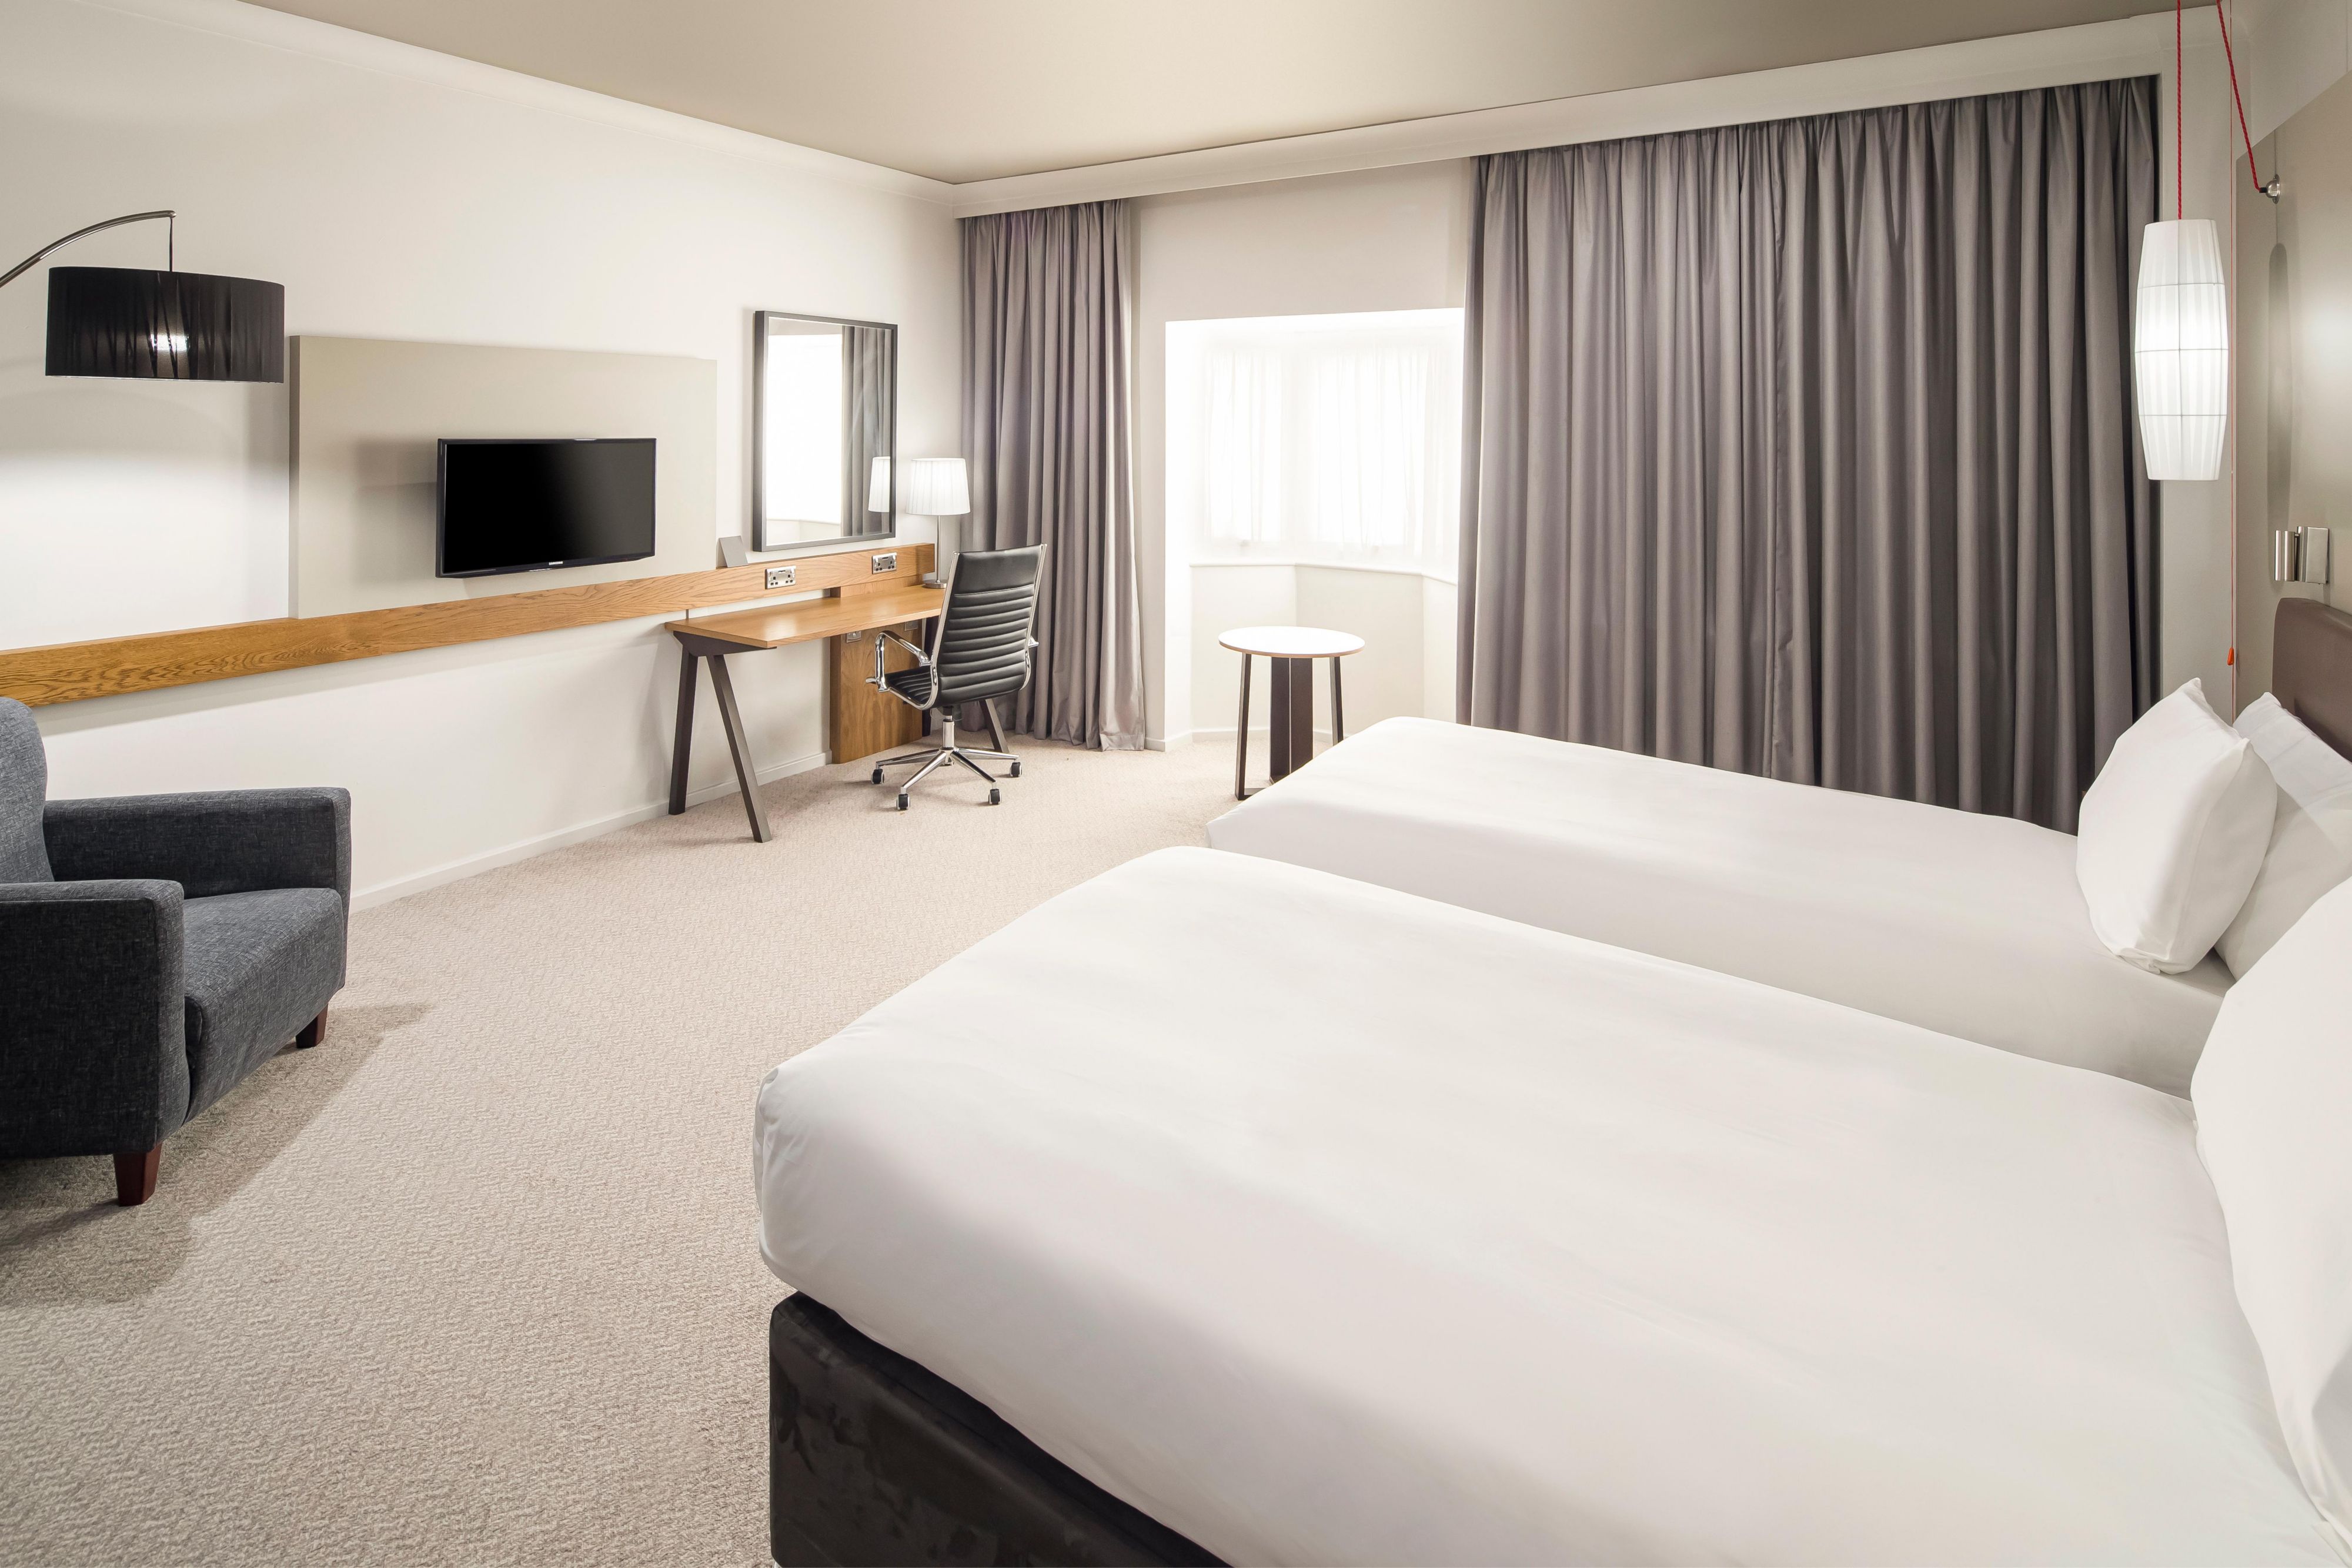 Enjoy your stay in our relaxing and modern twin bedroom.